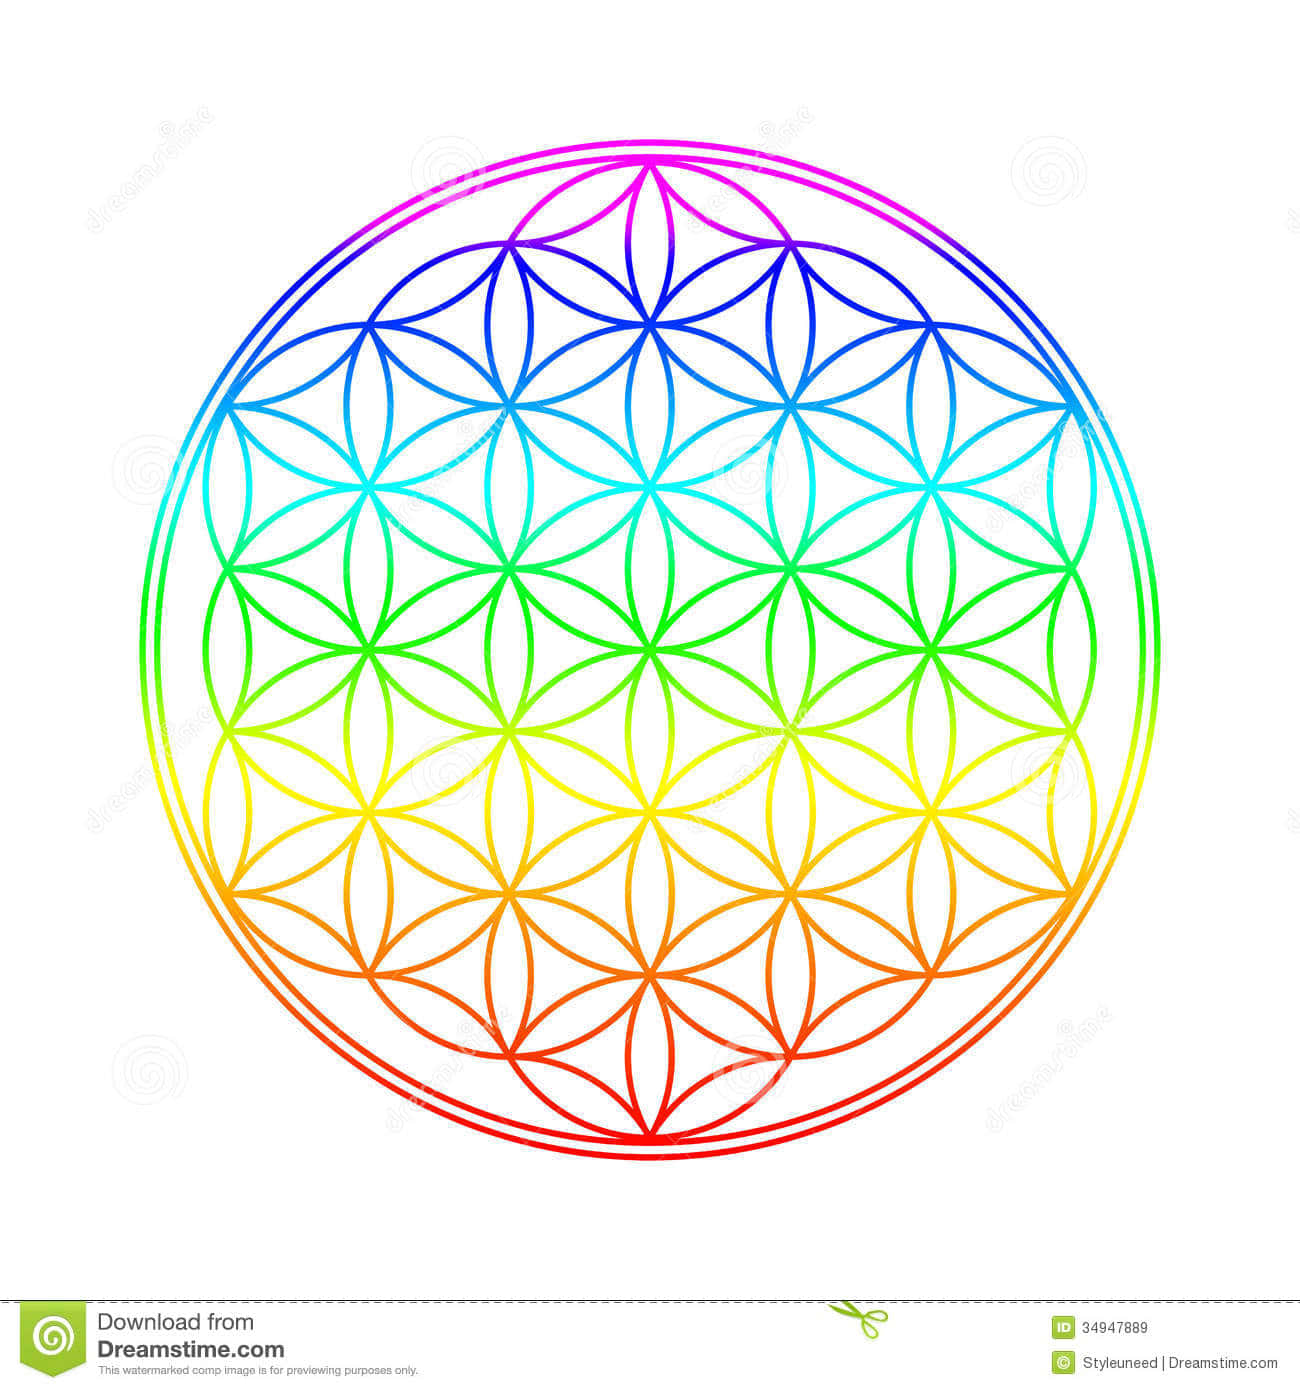 A Rainbow Colored Flower Of Life Wallpaper